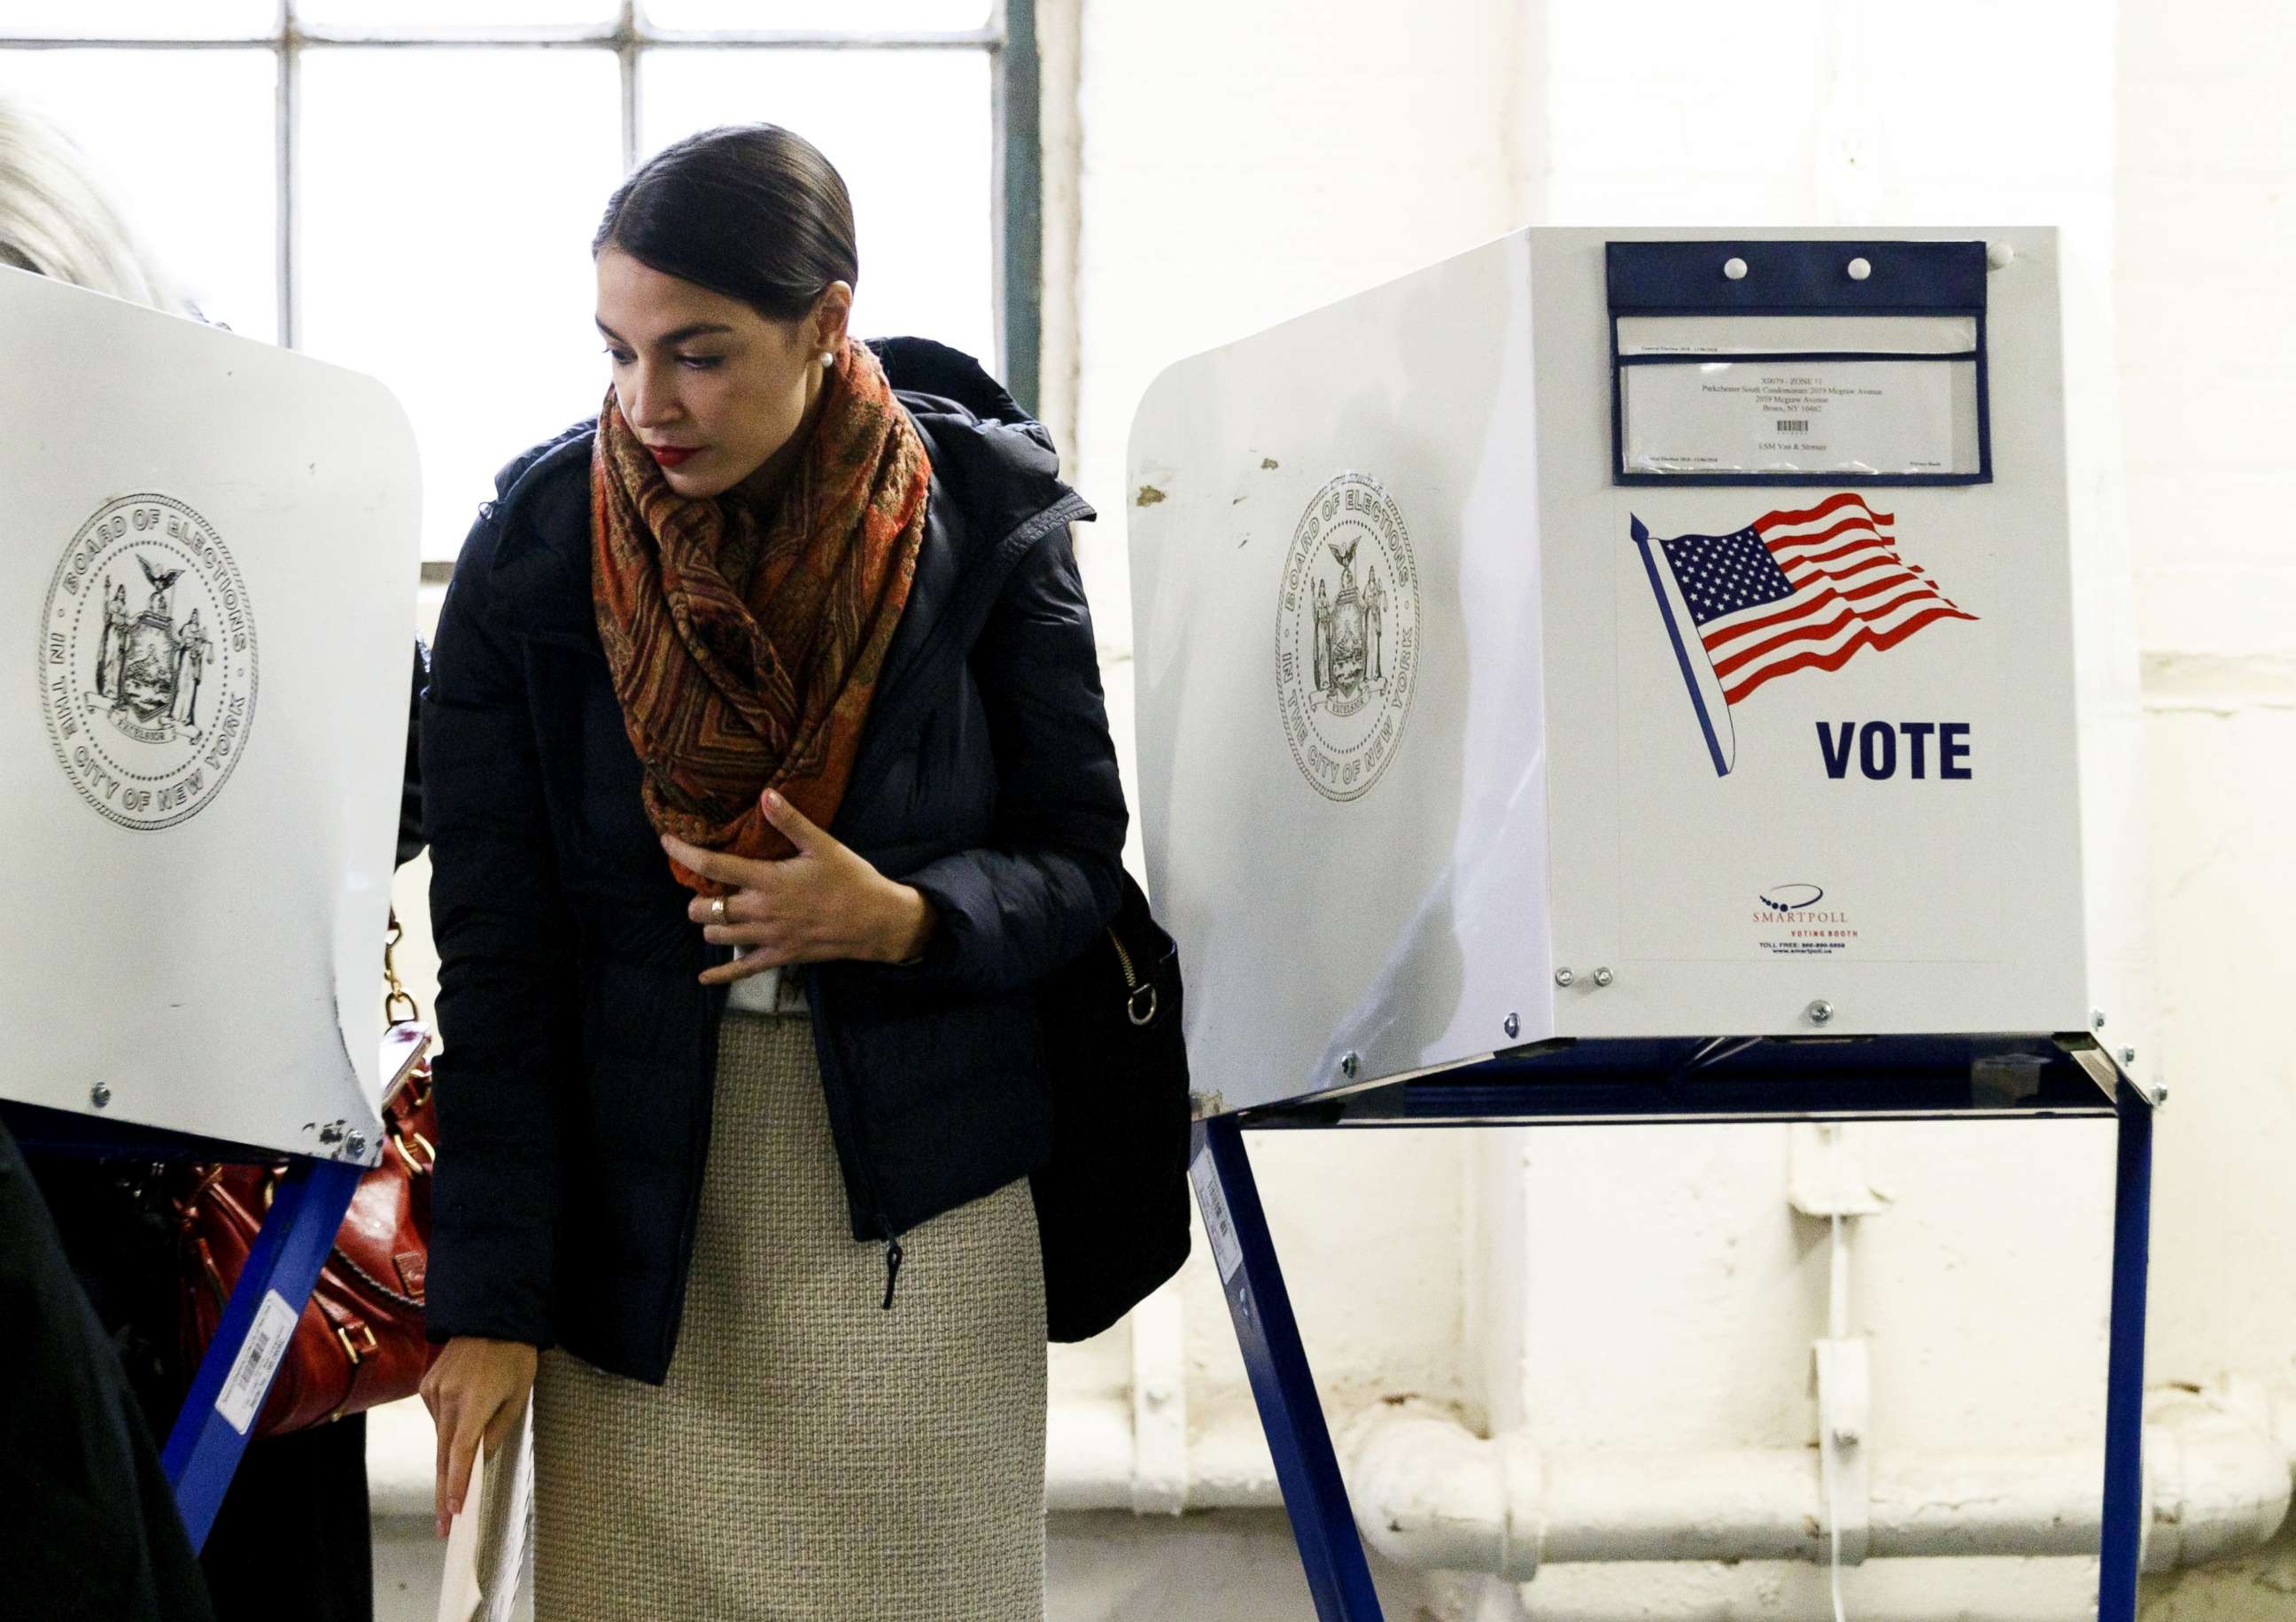 PHOTO: Alexandria Ocasio-Cortez casts her vote in the 2018 mid-term general election at a polling site in the Bronx, New York, Nov. 6, 2018.